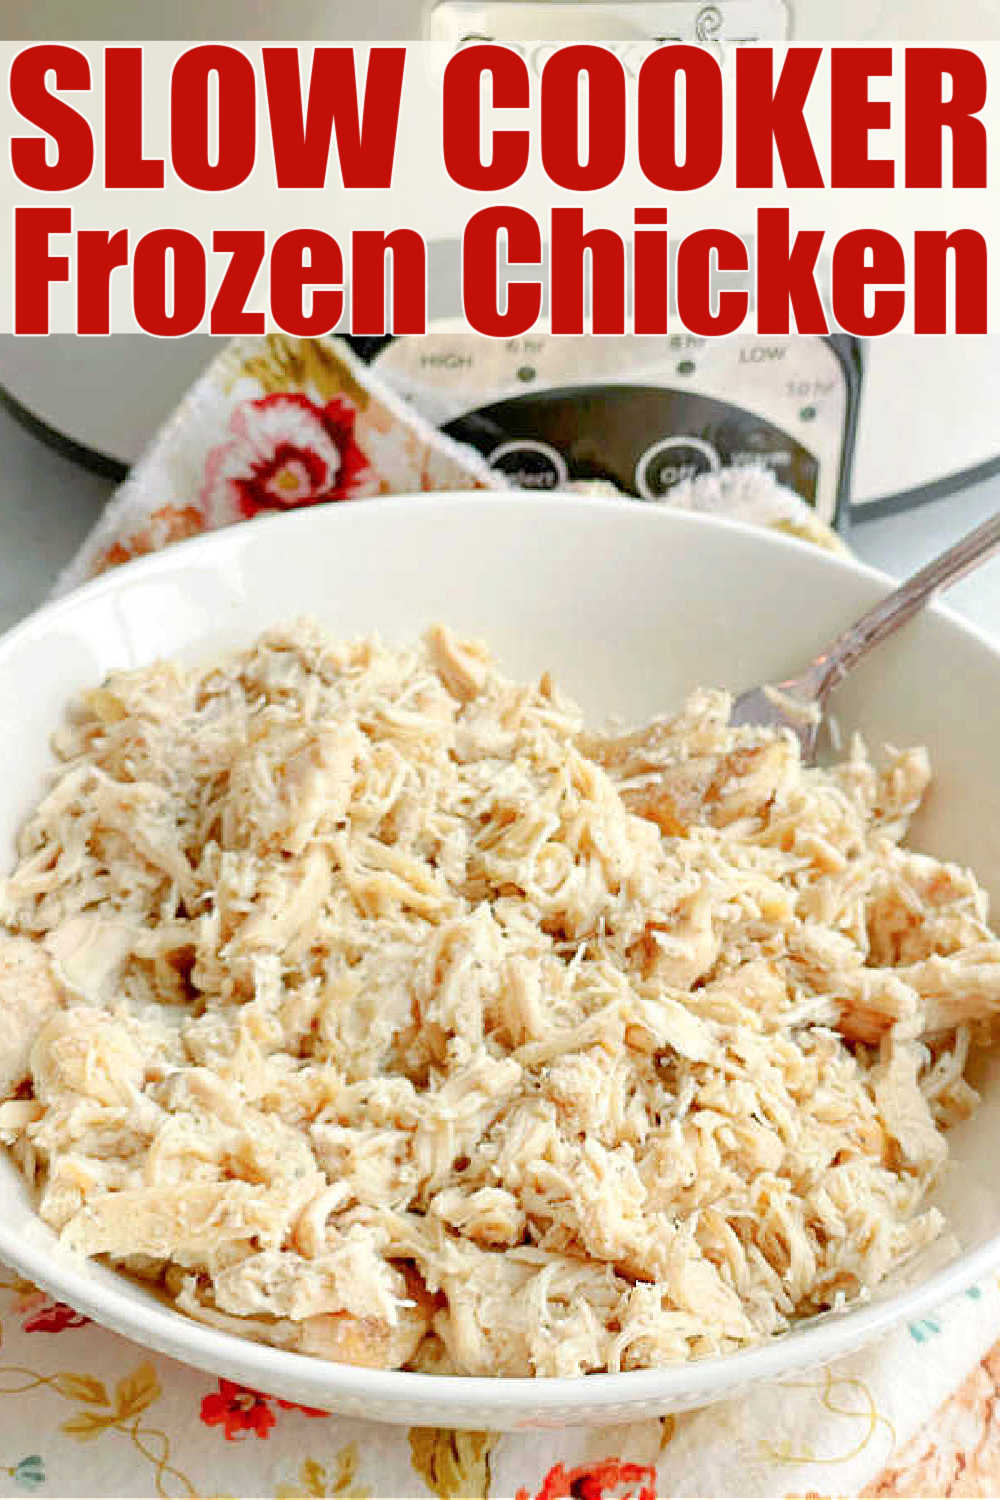 a bowl of cooked chicken sitting in front of the Crock-Pot it was cooked in